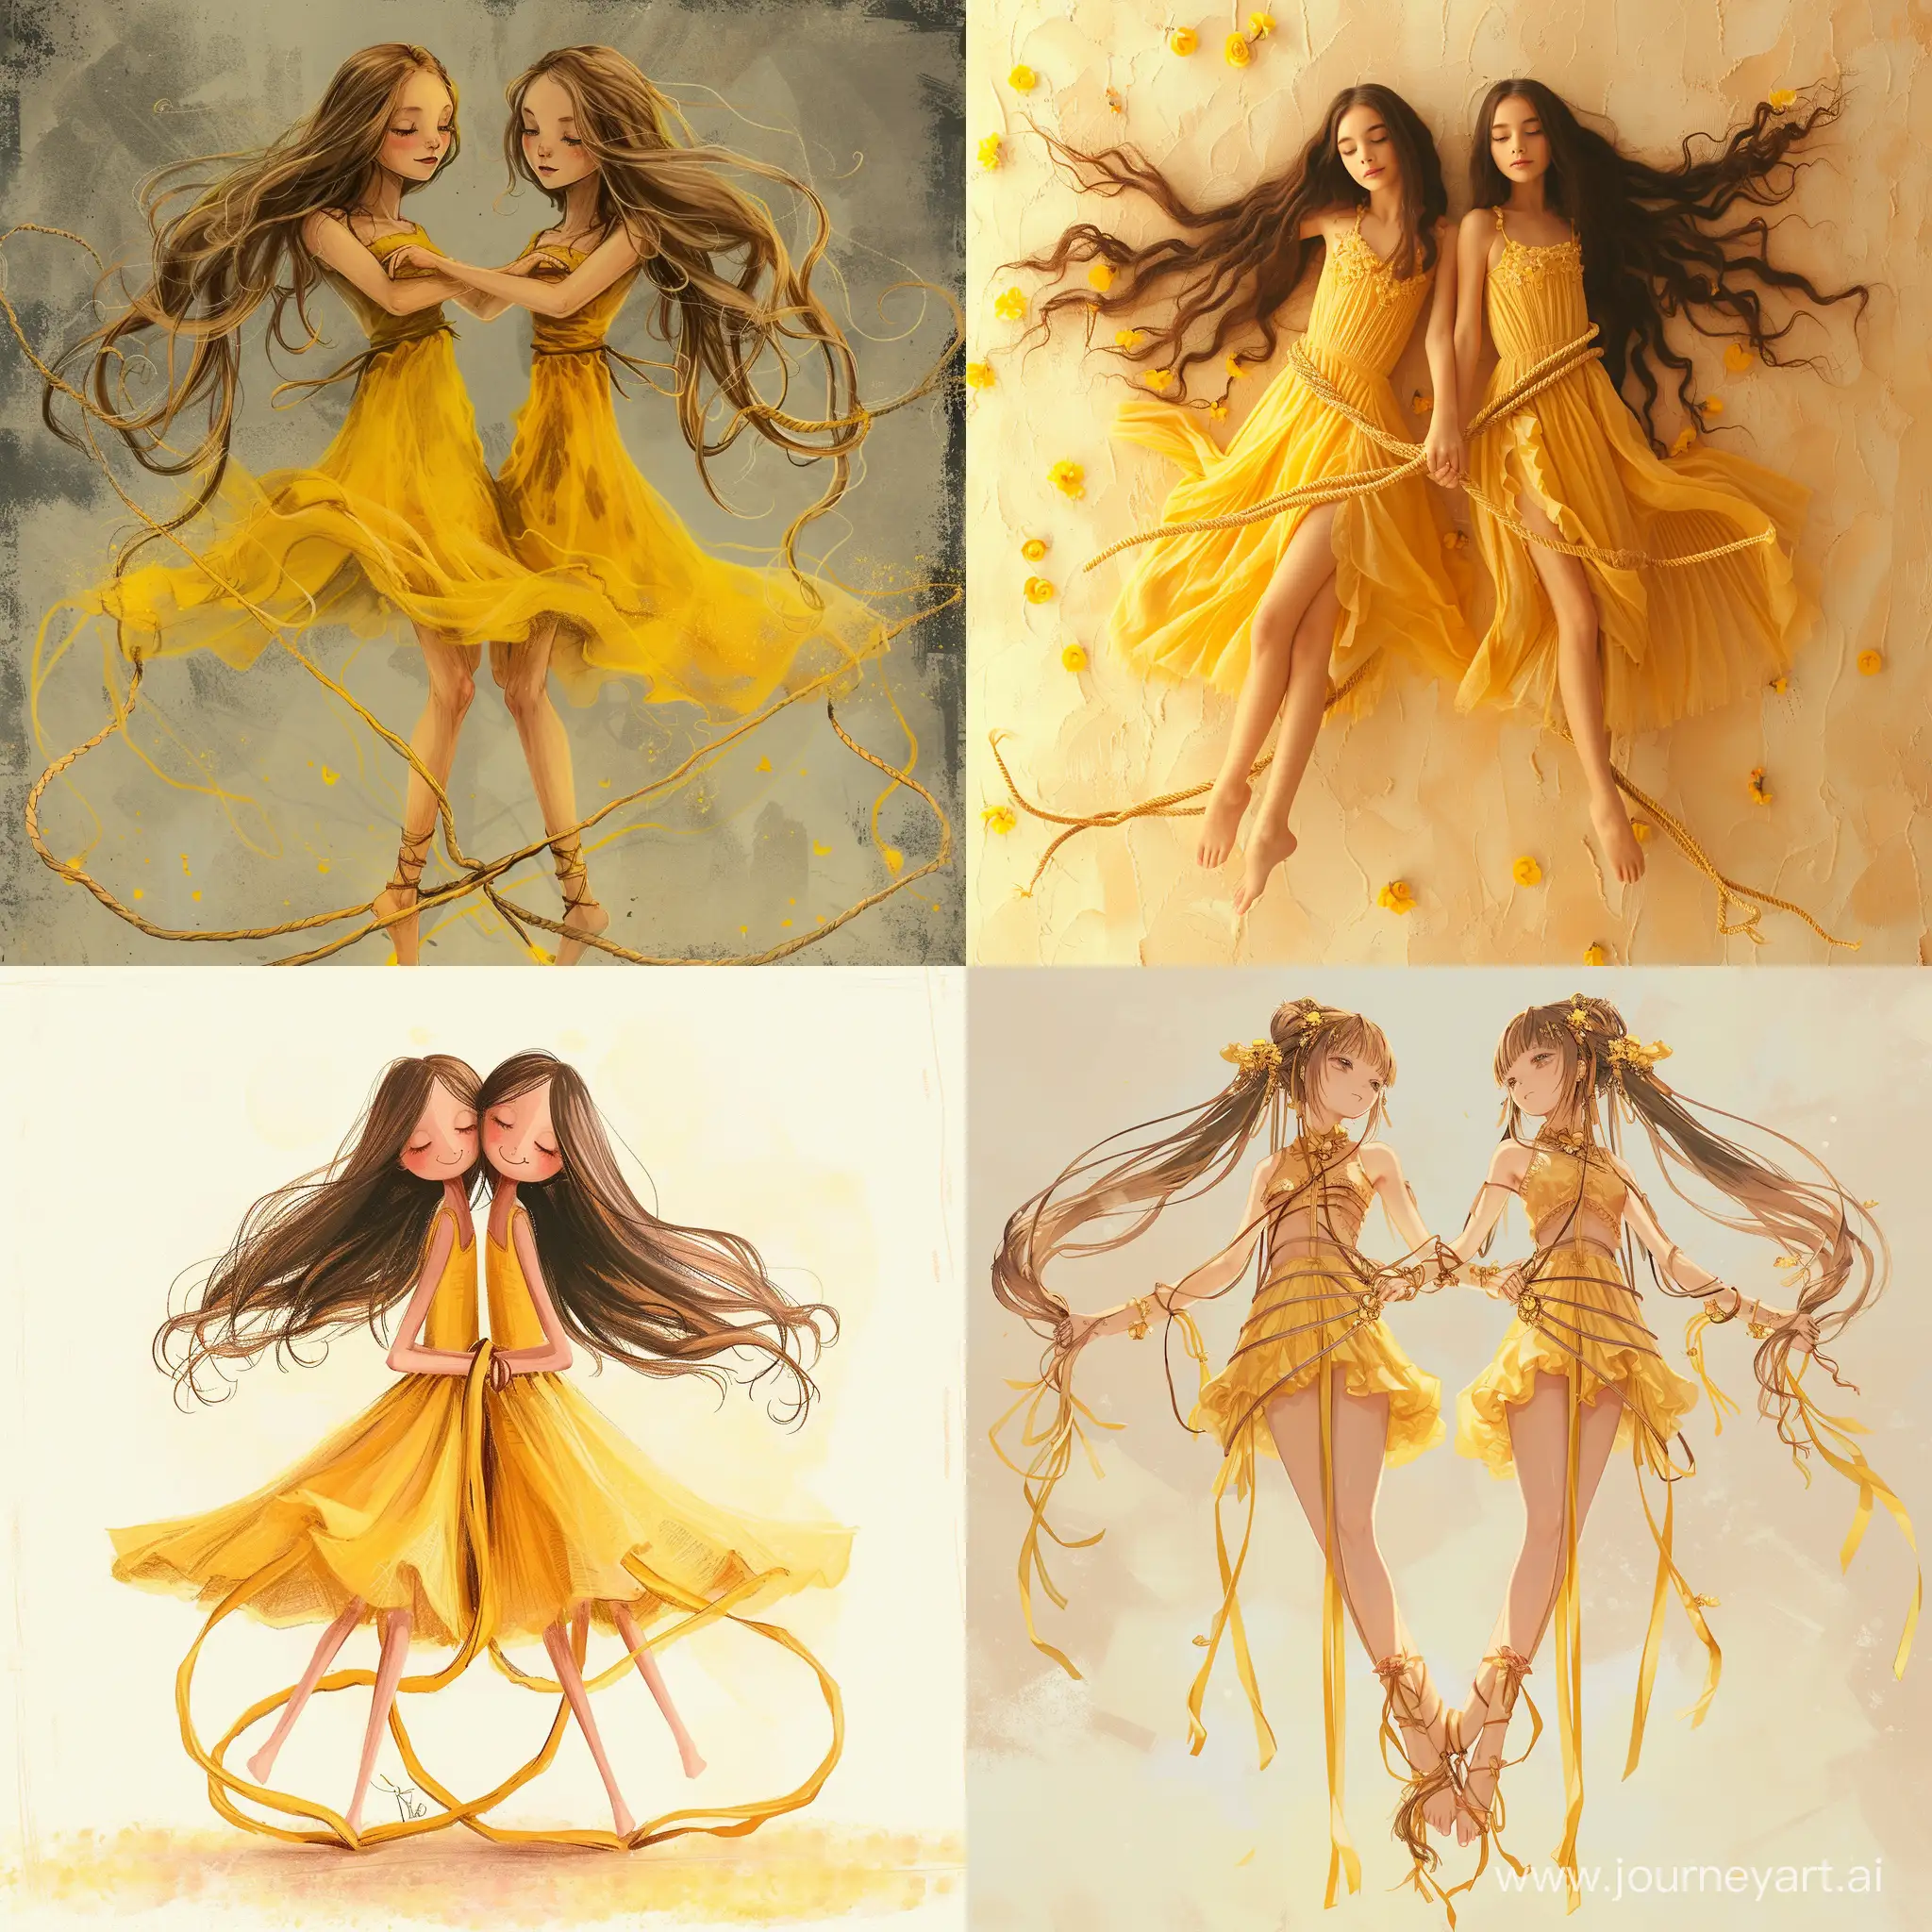 Graceful-Synchronized-Dance-Two-Tall-Girls-in-Yellow-Dresses-with-Flowing-Hair